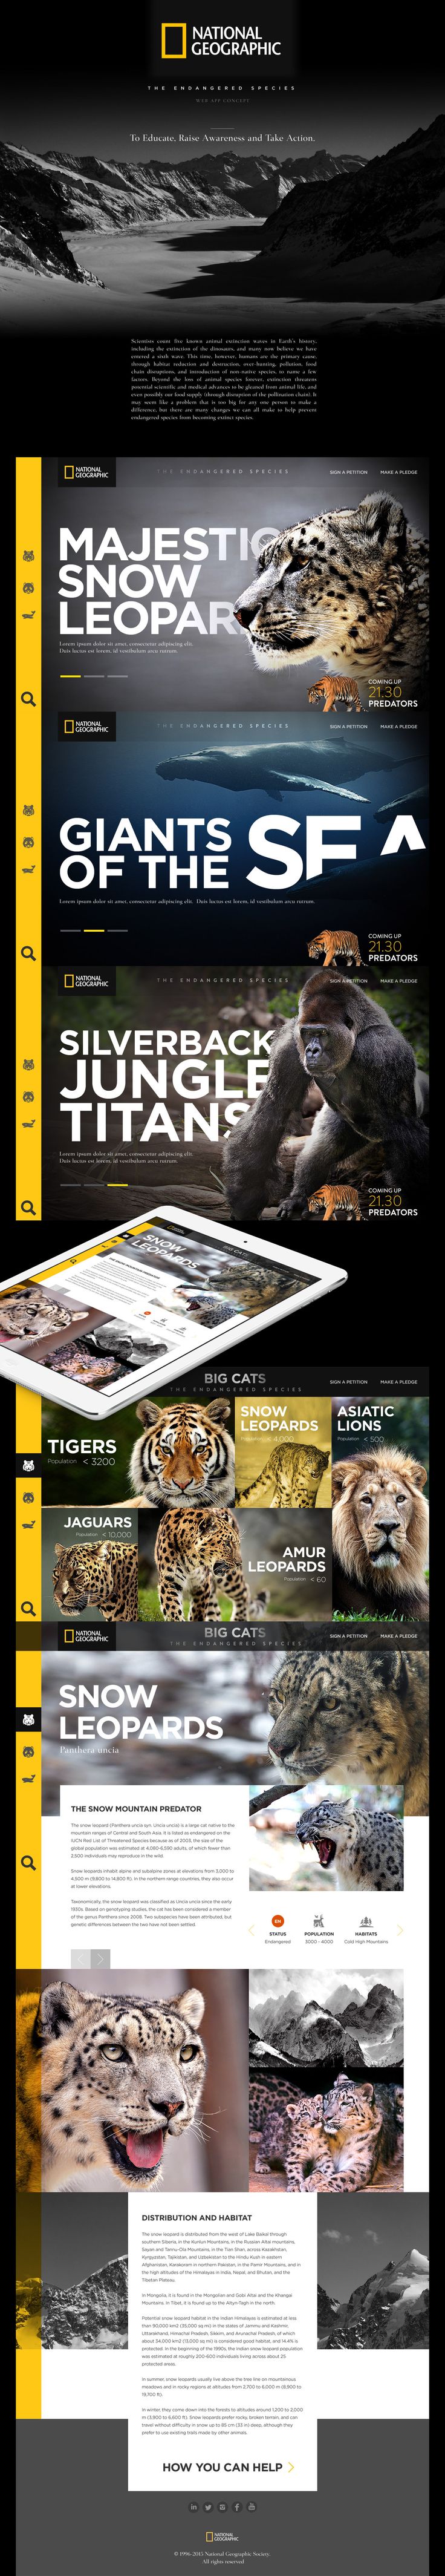 National Geographic - The Endangered Species by Daniel Ng